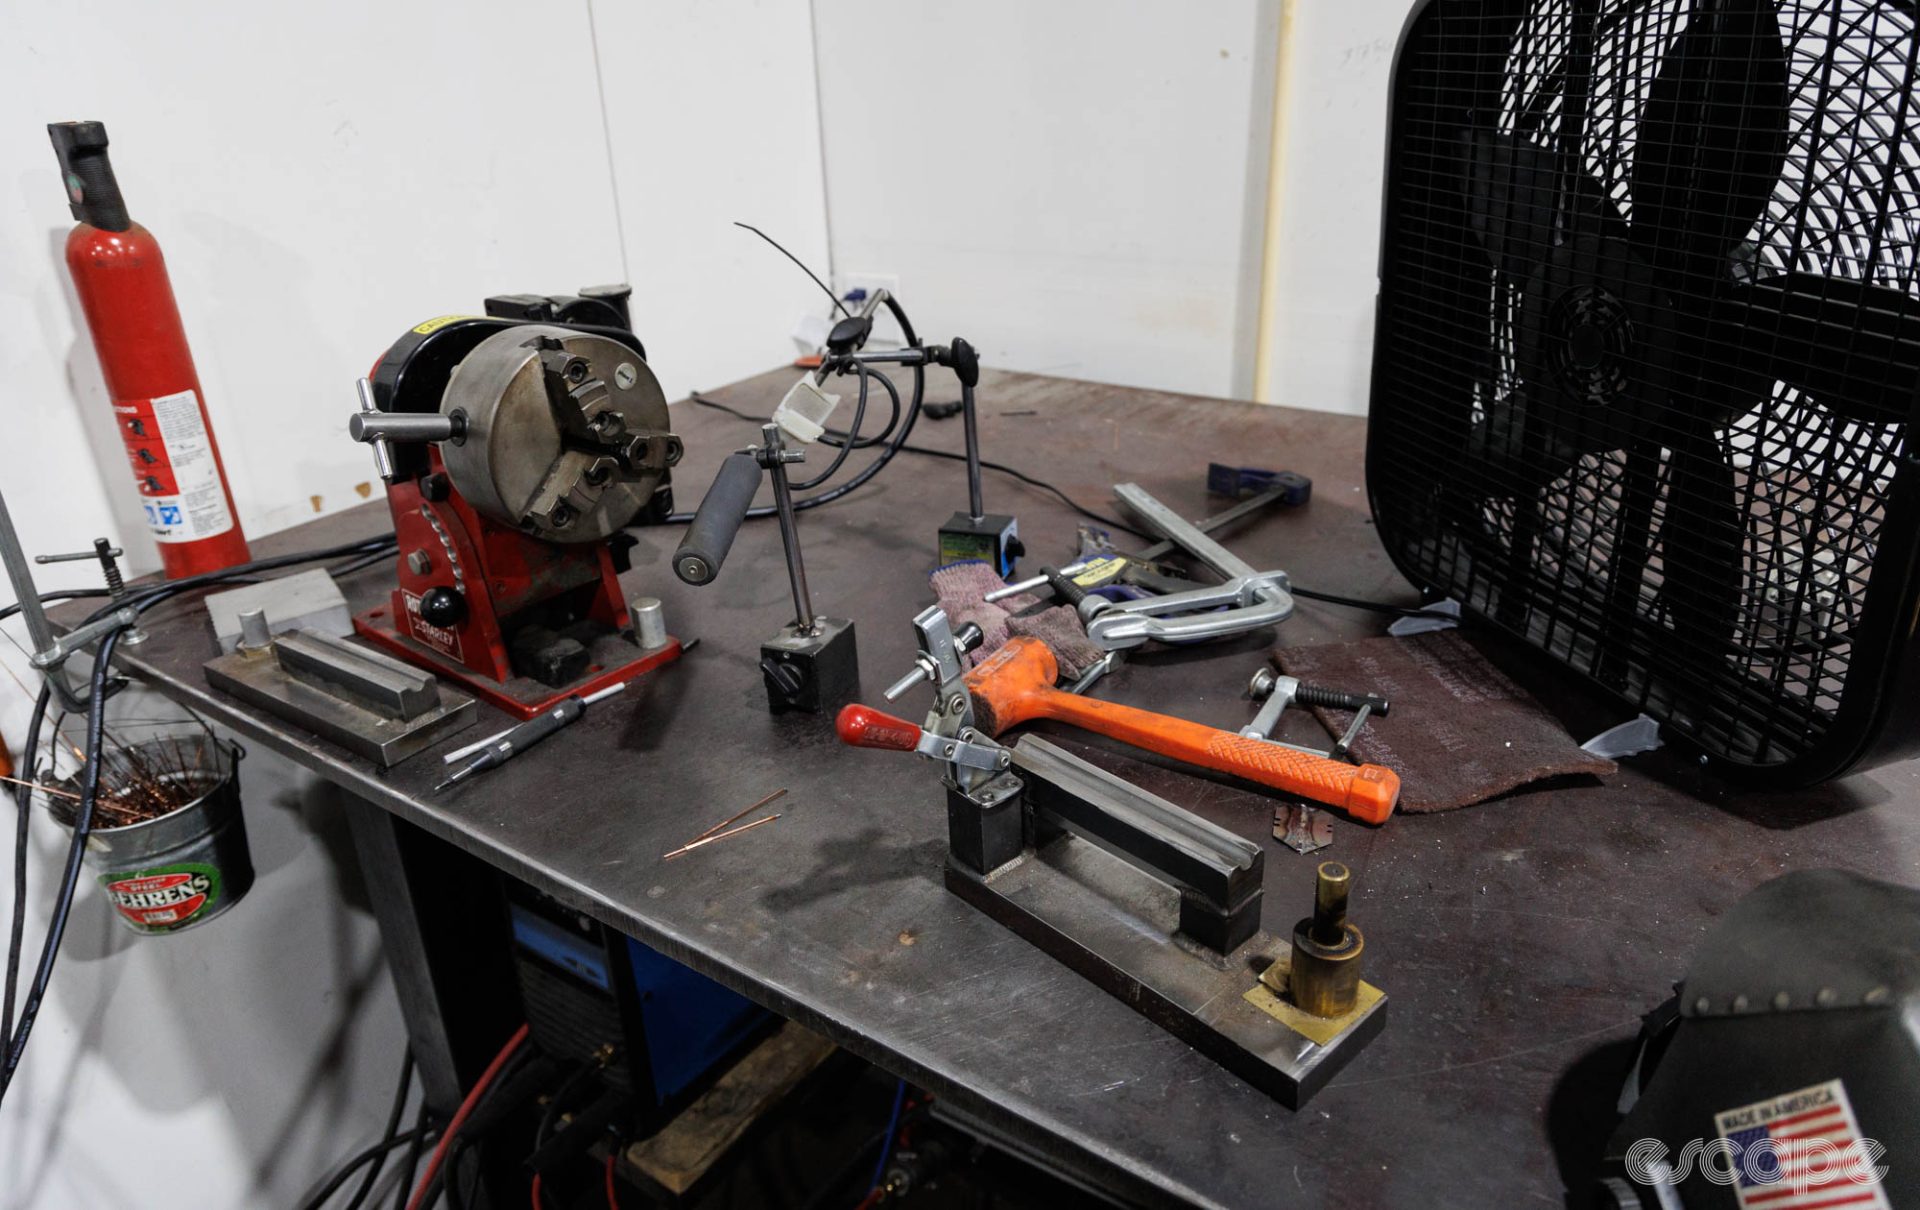 A cluttered bench contains implements for welding tools, with a small bucket of TIG welding rod hanging off one end.